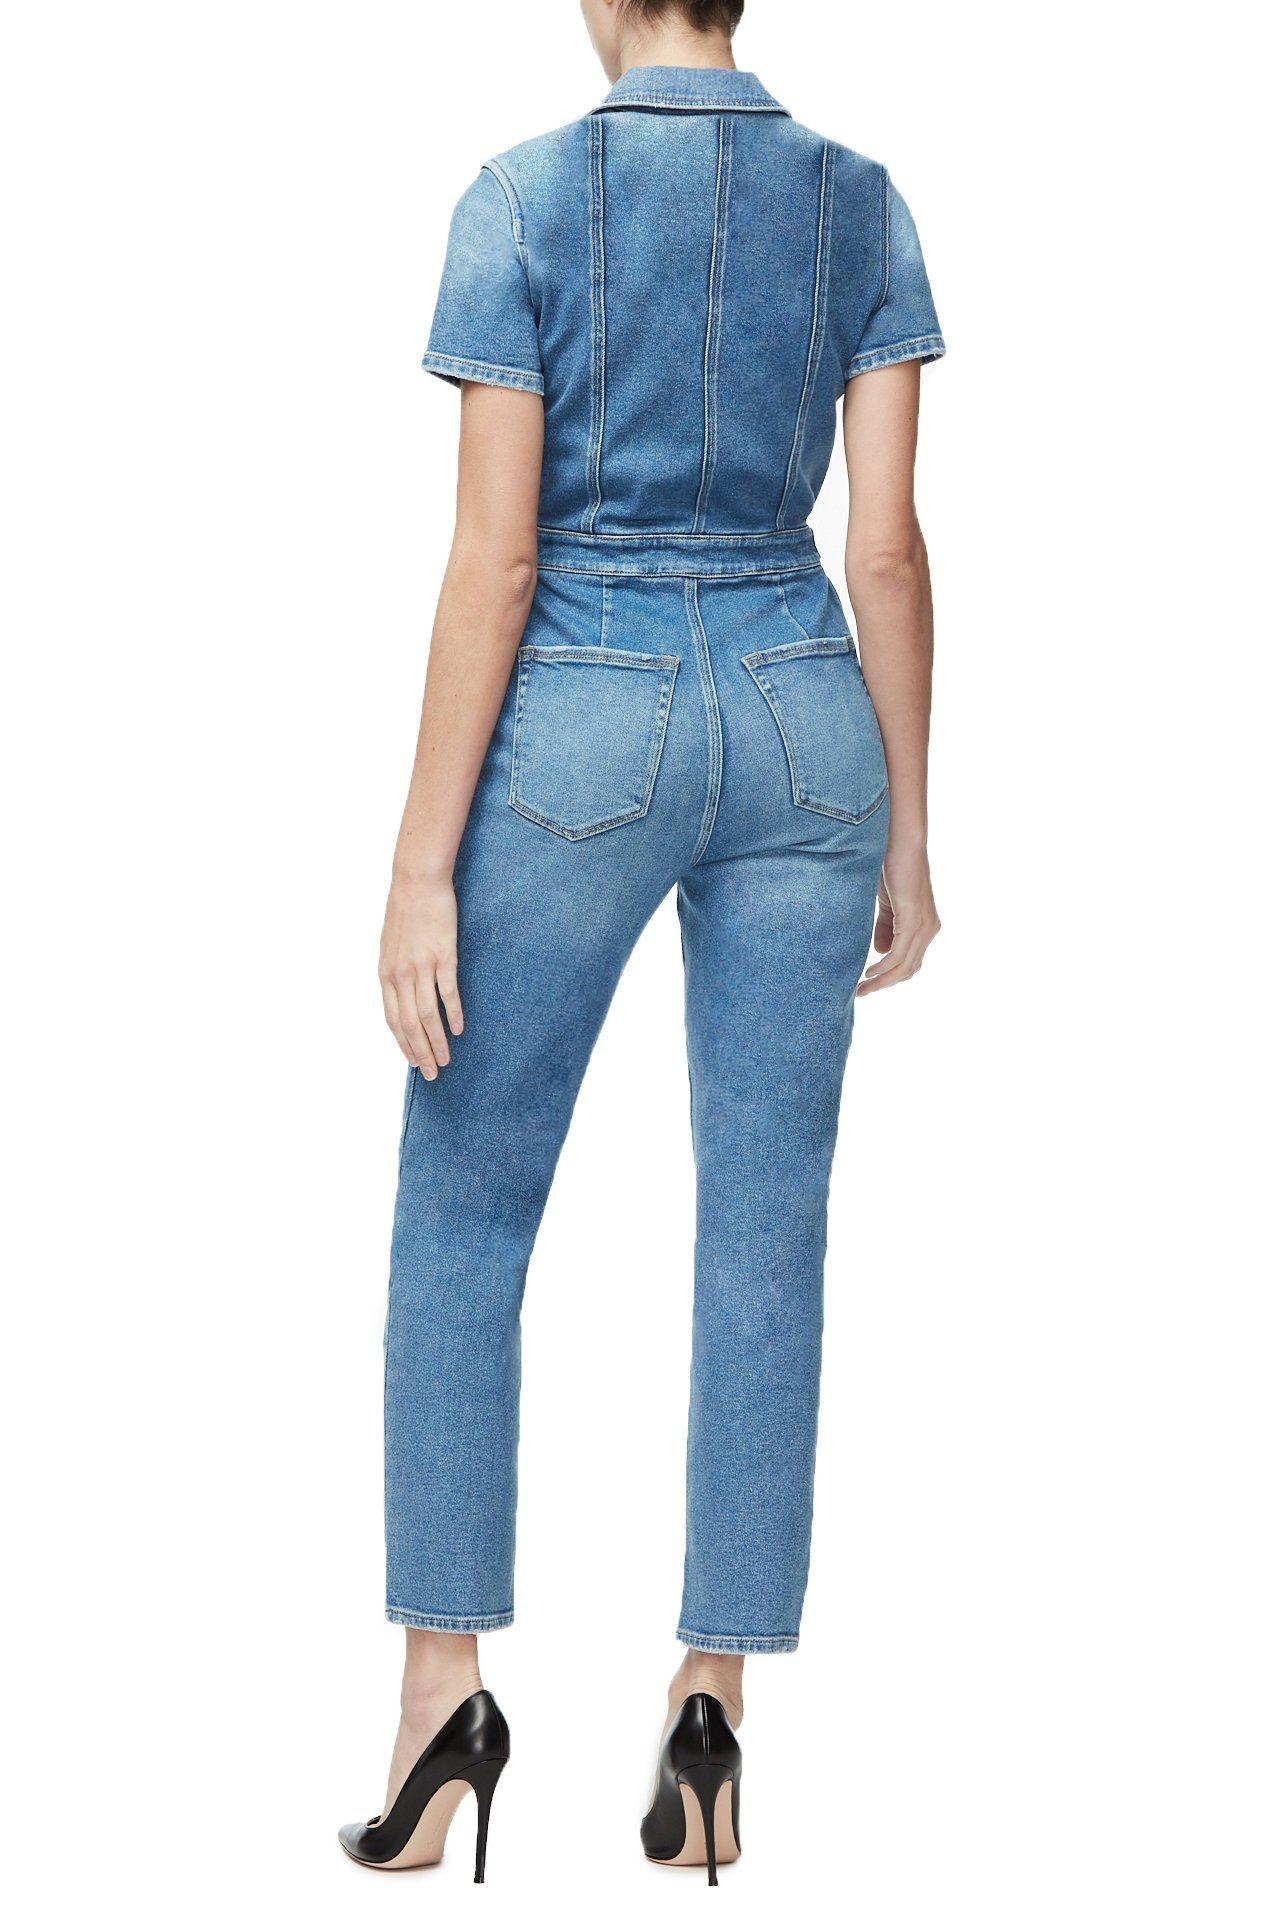 GOOD AMERICAN Denim The Fit For Success Jumpsuit in Blue - Lyst